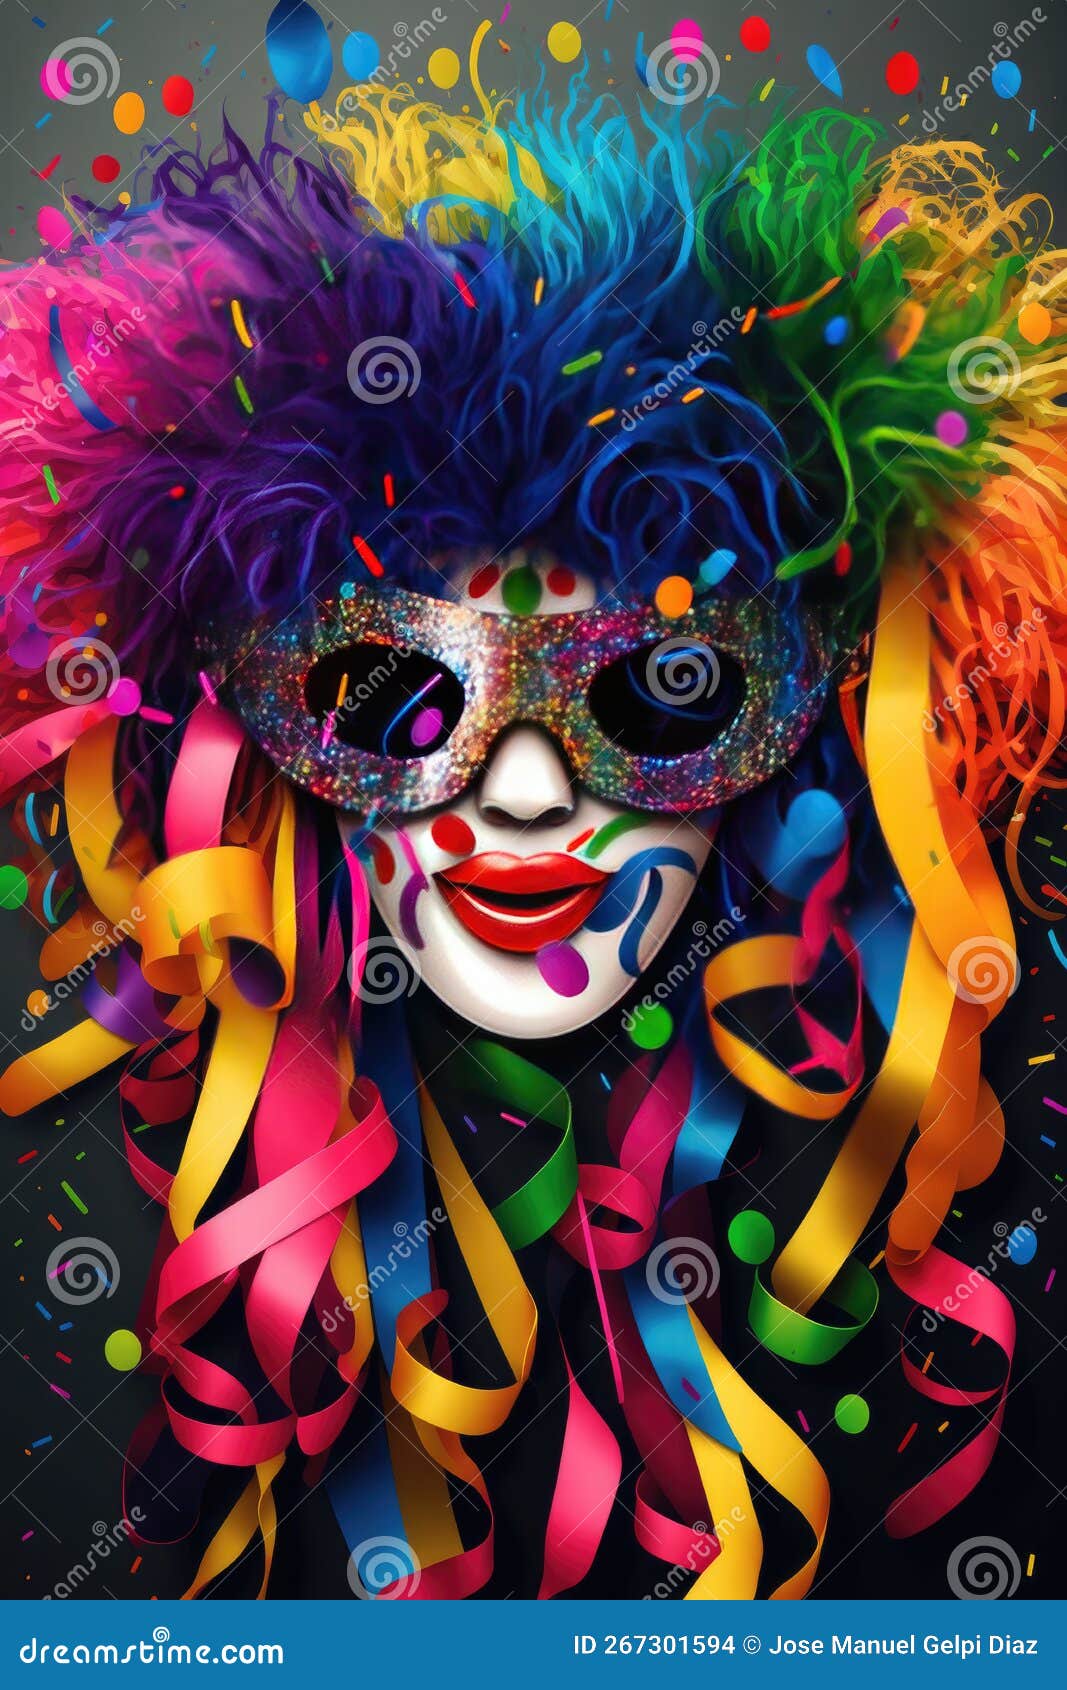 Concept of the Carnival. Colorful Masks, Crazy Wigs, Symbol of the